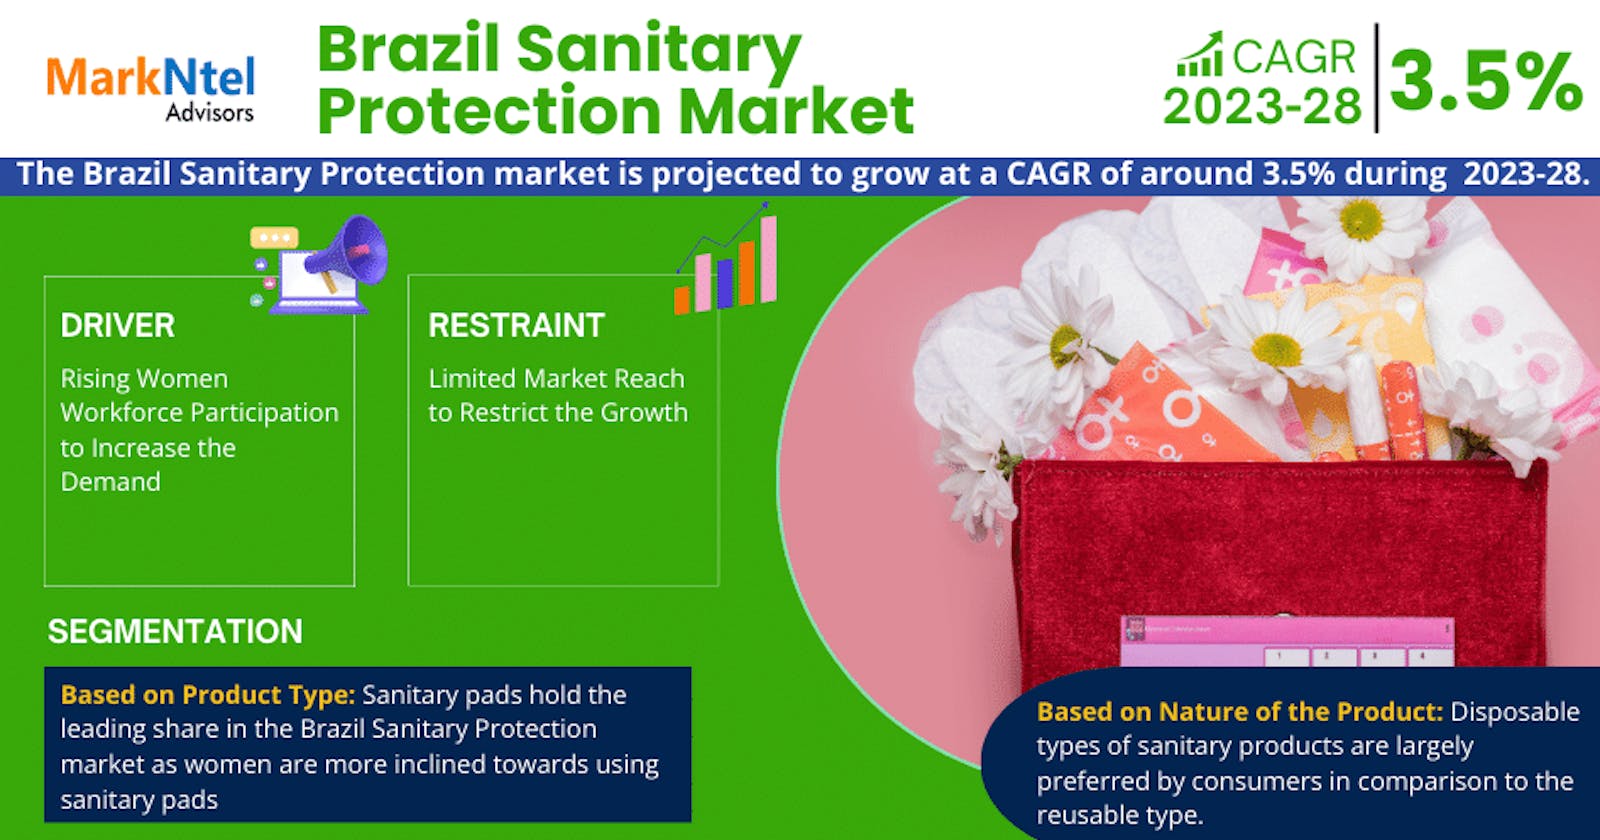 Brazil Sanitary Protection Market Forecasts 3.5% CAGR Growth Through 2028